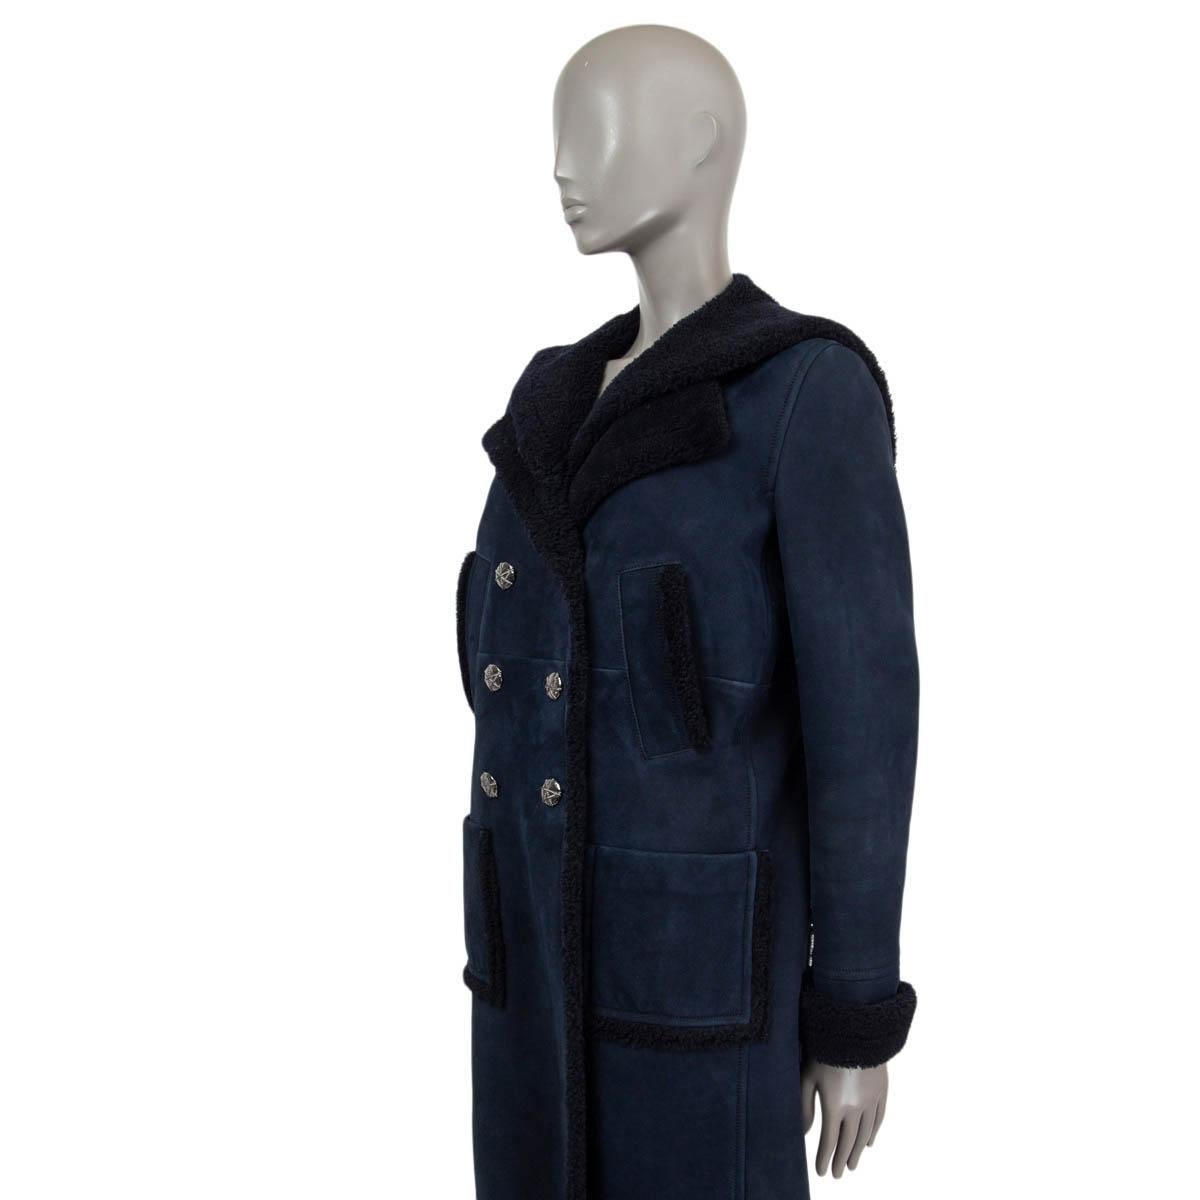 Women's CHANEL navy blue 2018 18A HAMBURG SUEDE & SHEARLING Coat Jacket 38 S For Sale